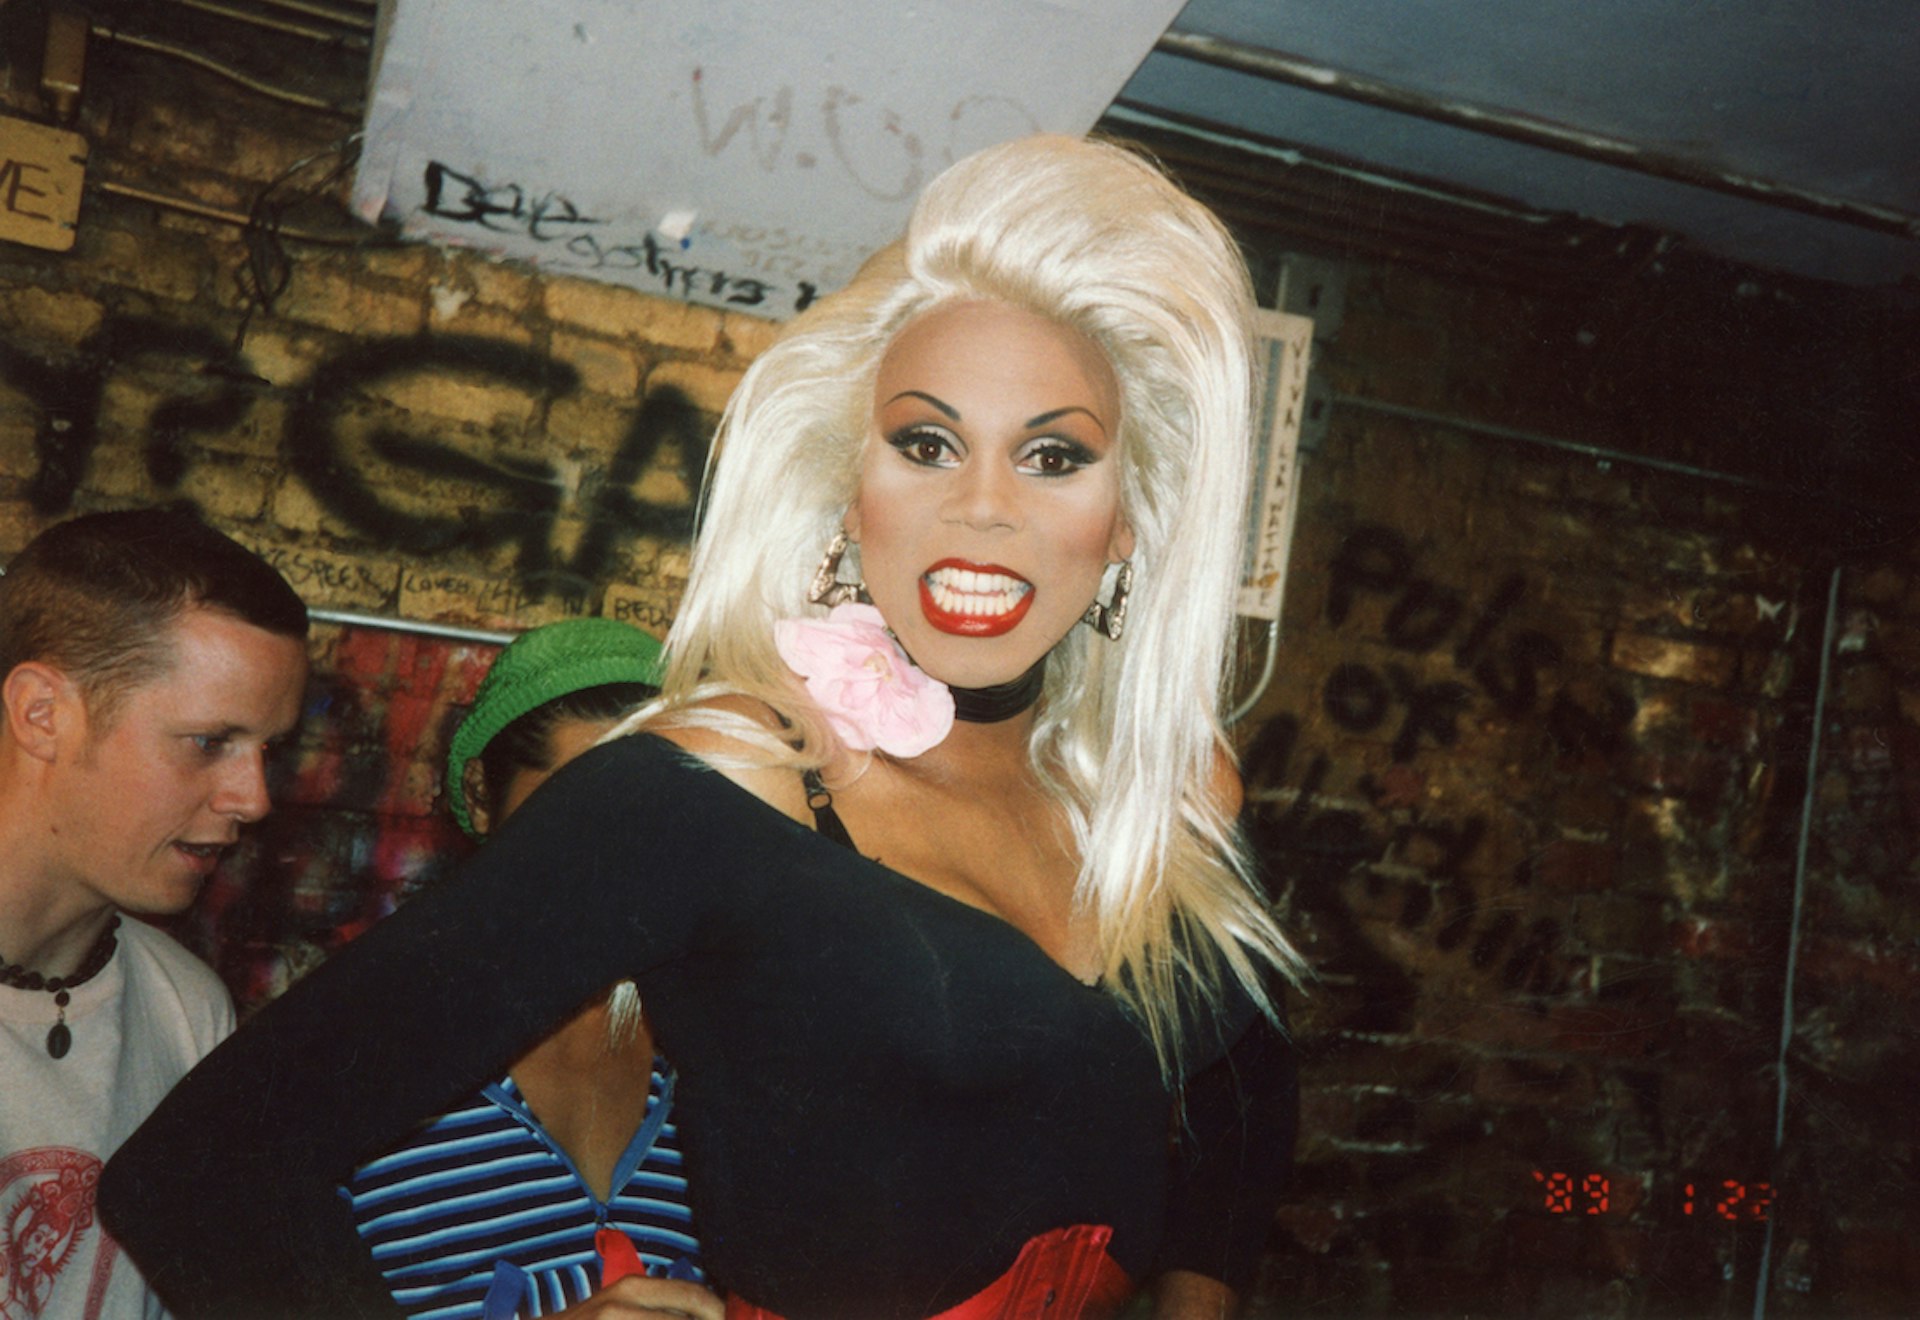 Photos of New York’s drag explosion in the ‘80s